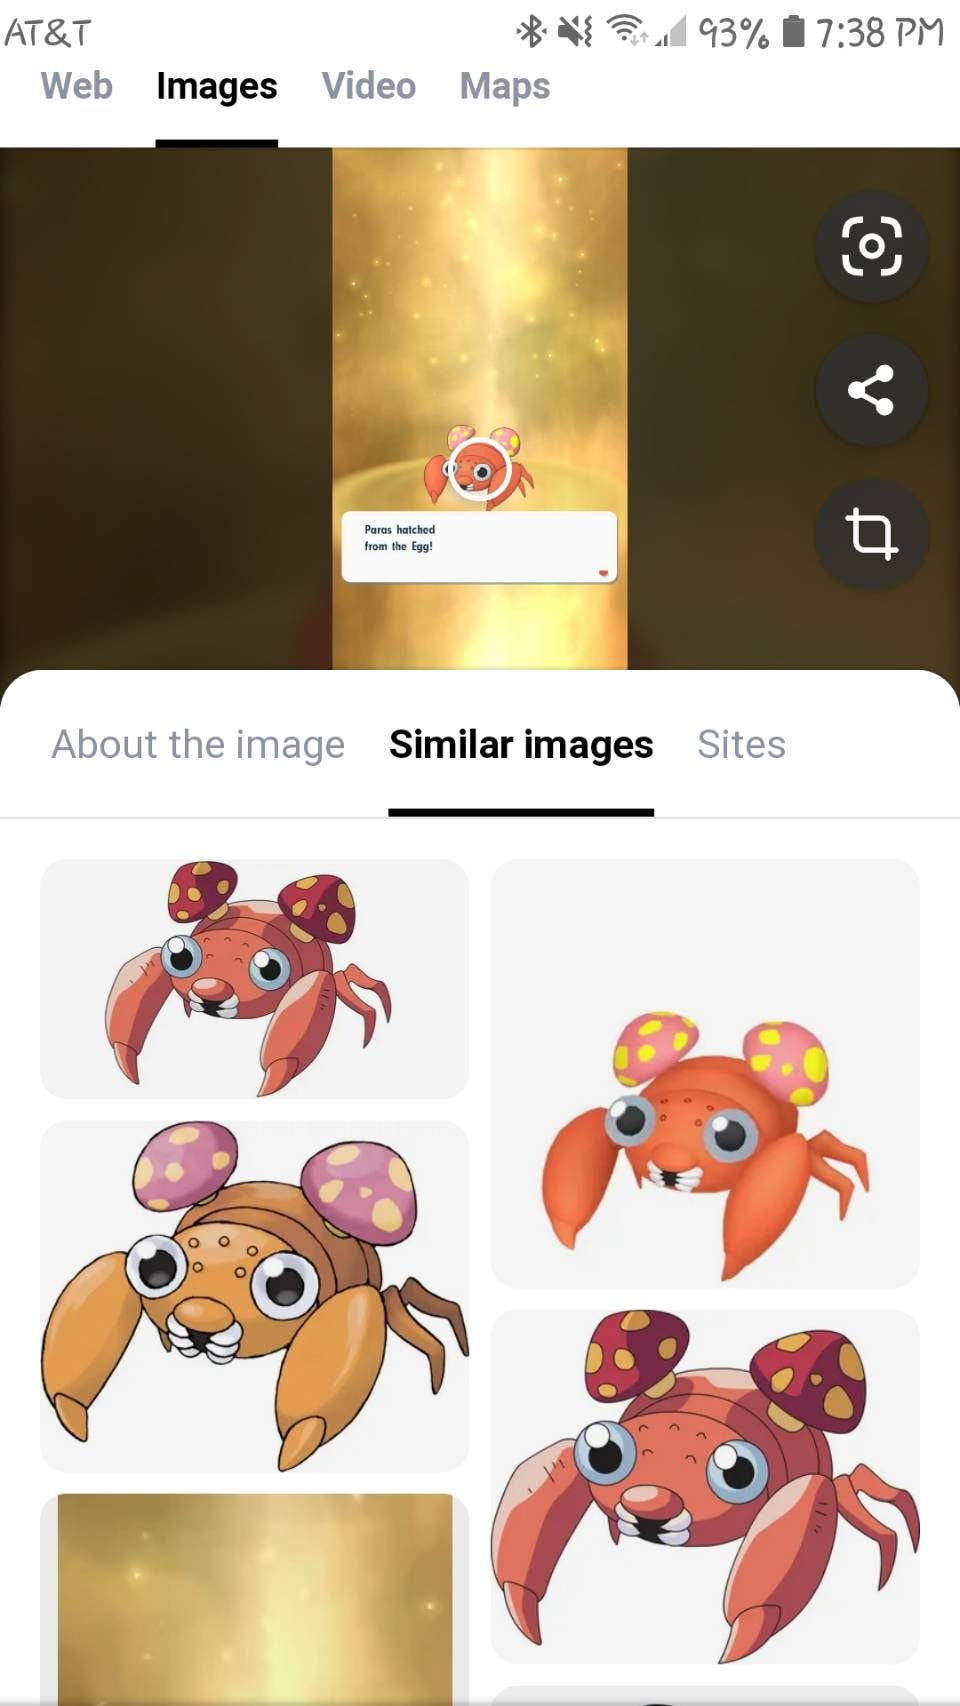 Yandex example similar image search results